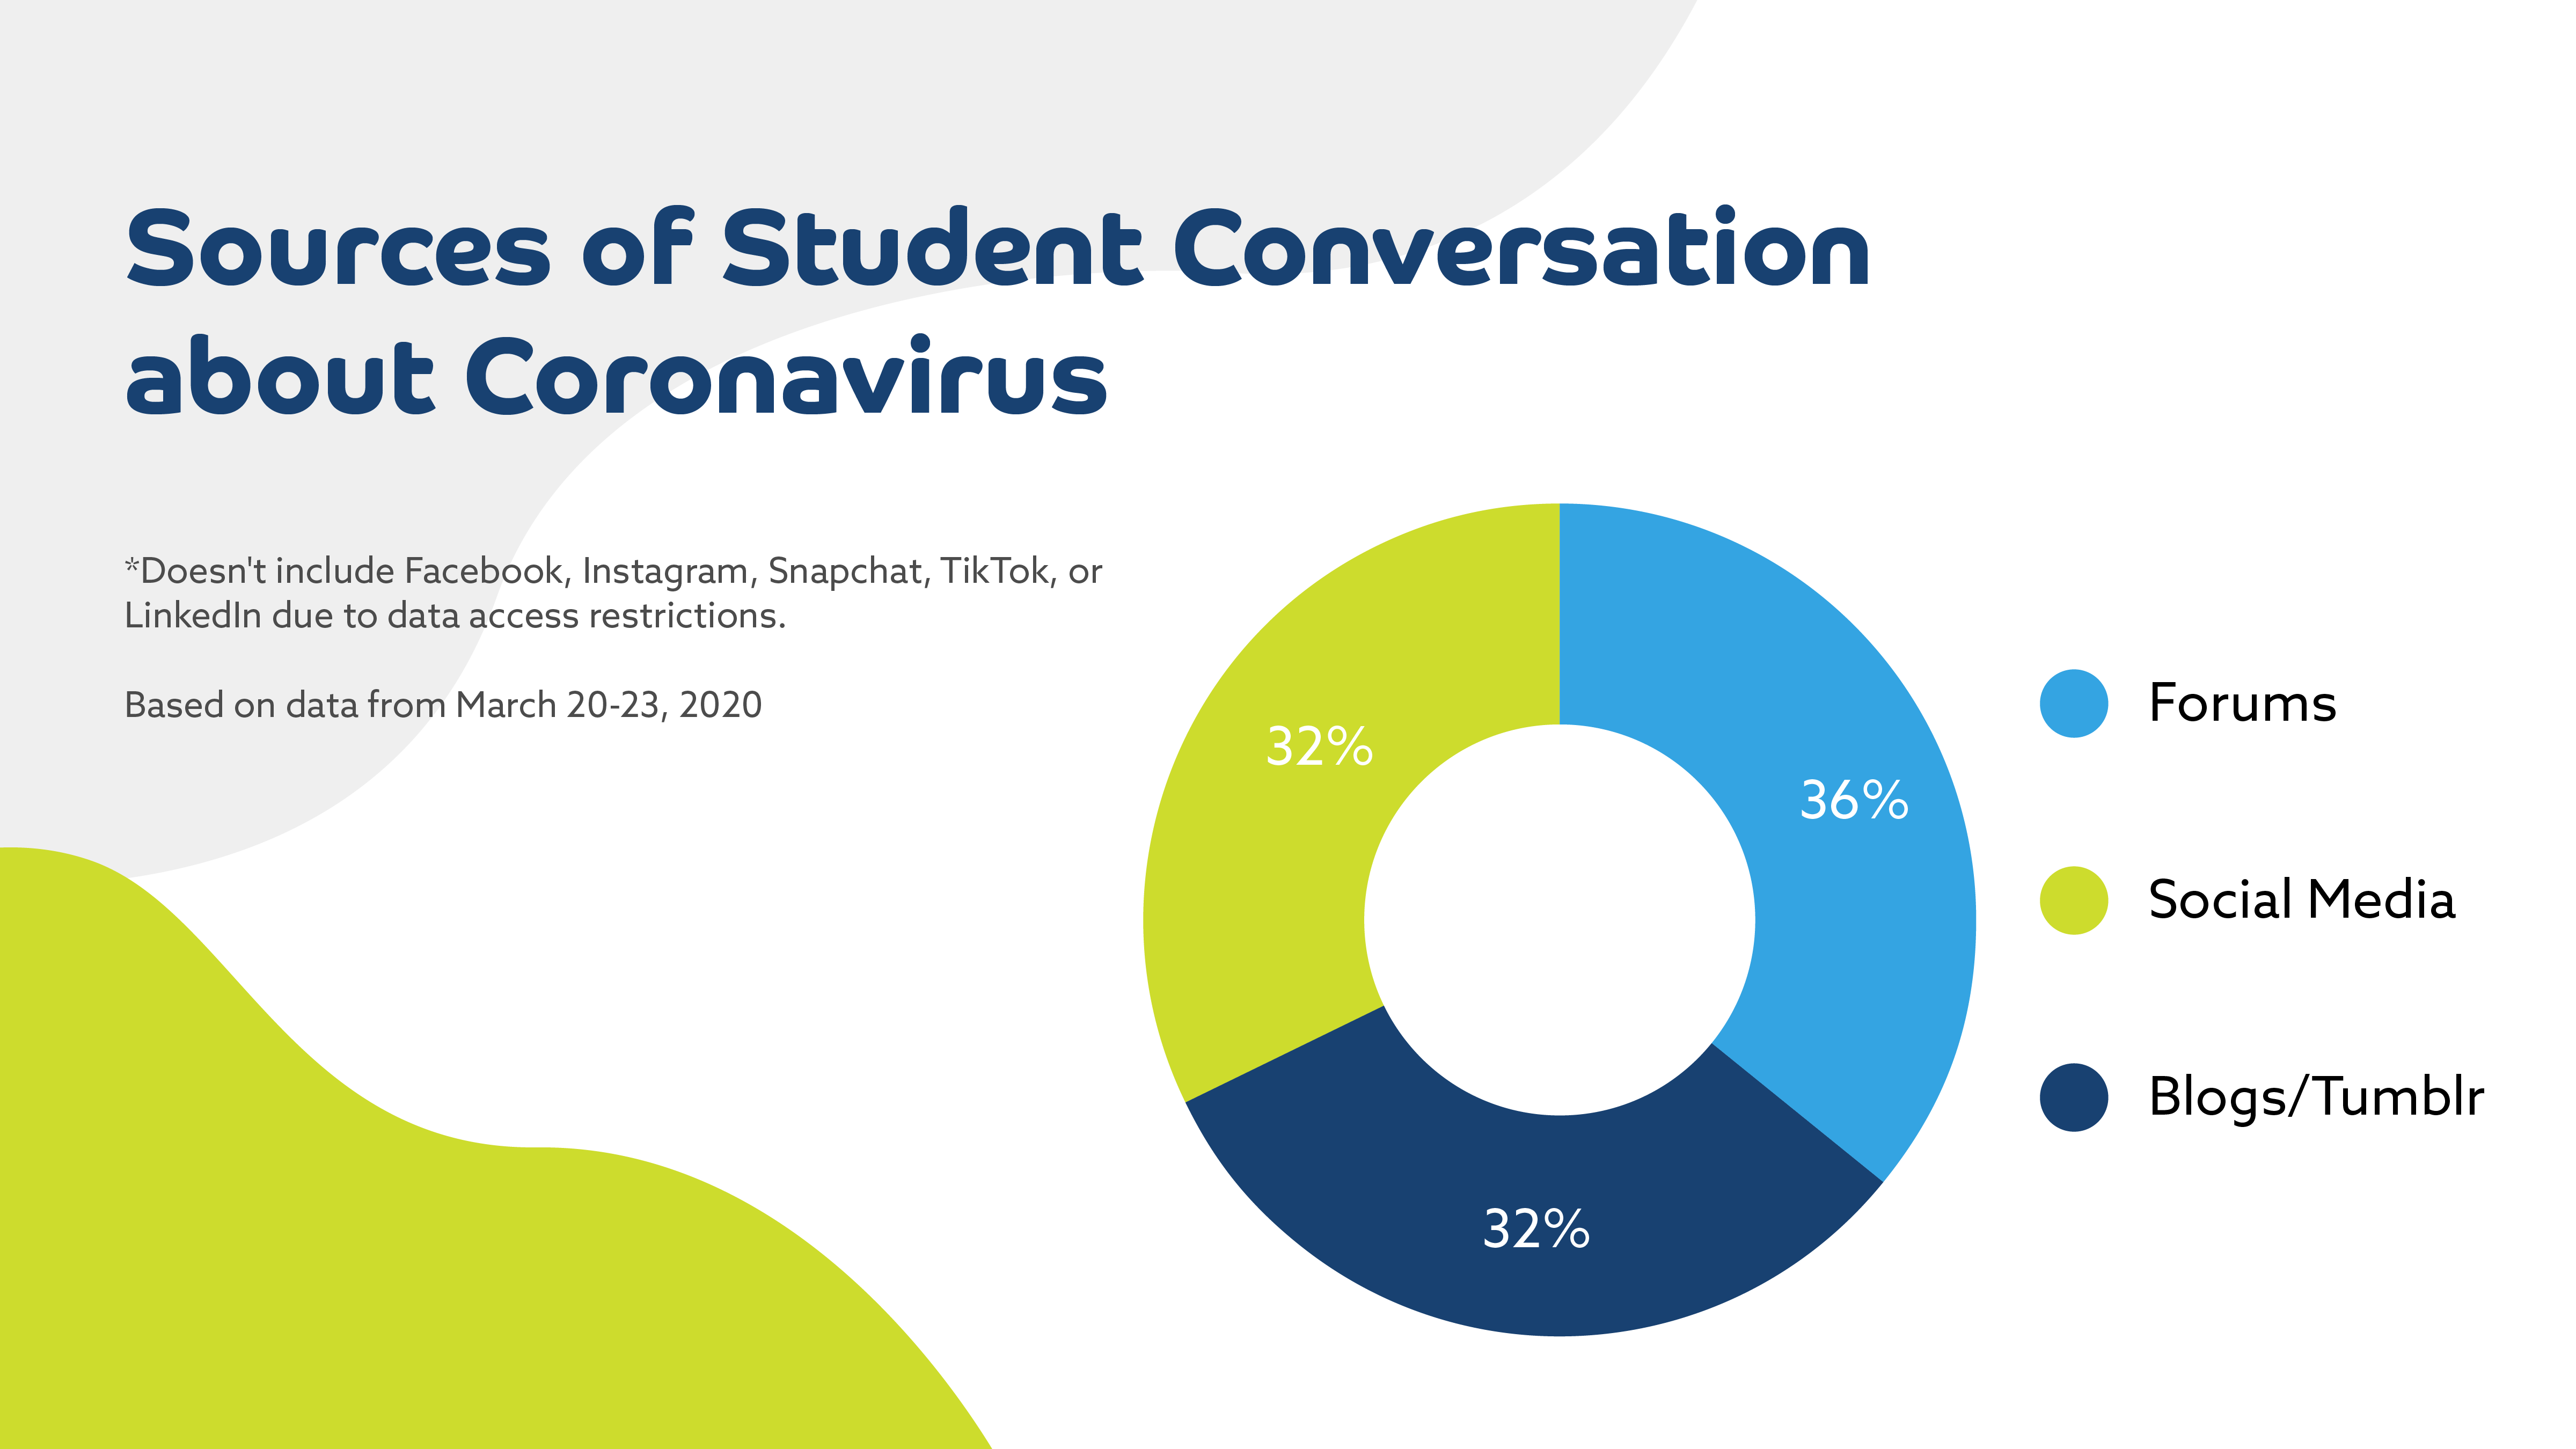 Sources of Student Conversation about Coronavirus showing 36% on forums, 32% on social media, and 32% on blogs/Tumblr